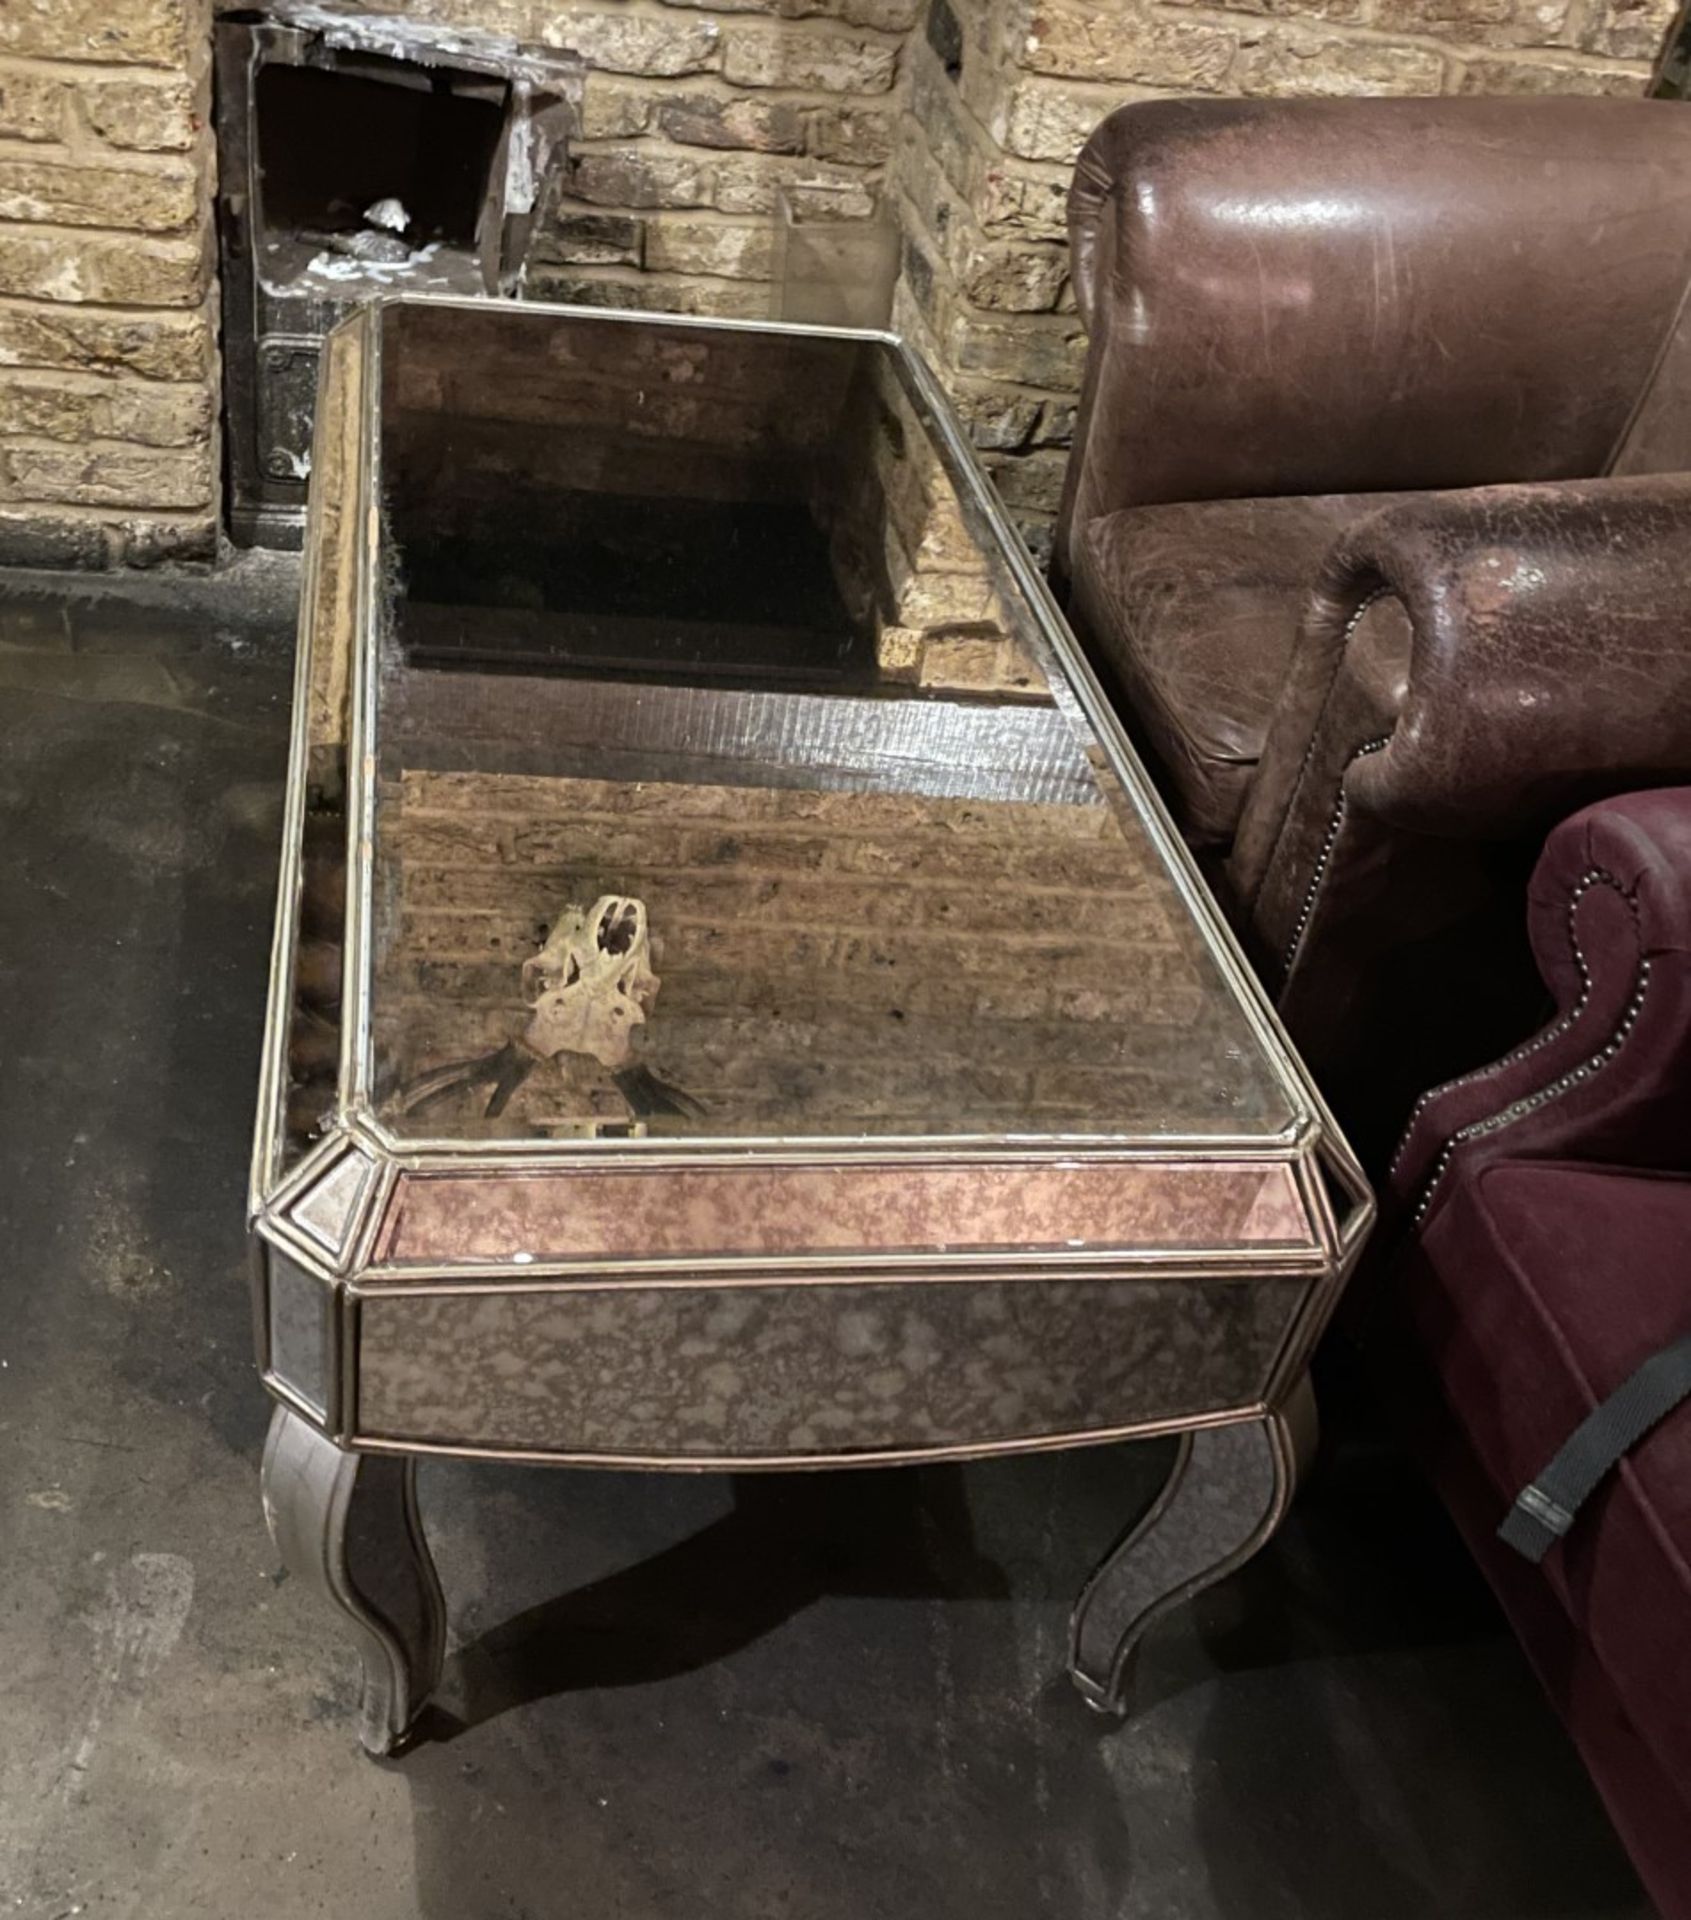 1 x Vintage French-style Mirrored Rectangular Cocktail Coffee Table with an Aged Aesthetic - Image 2 of 10